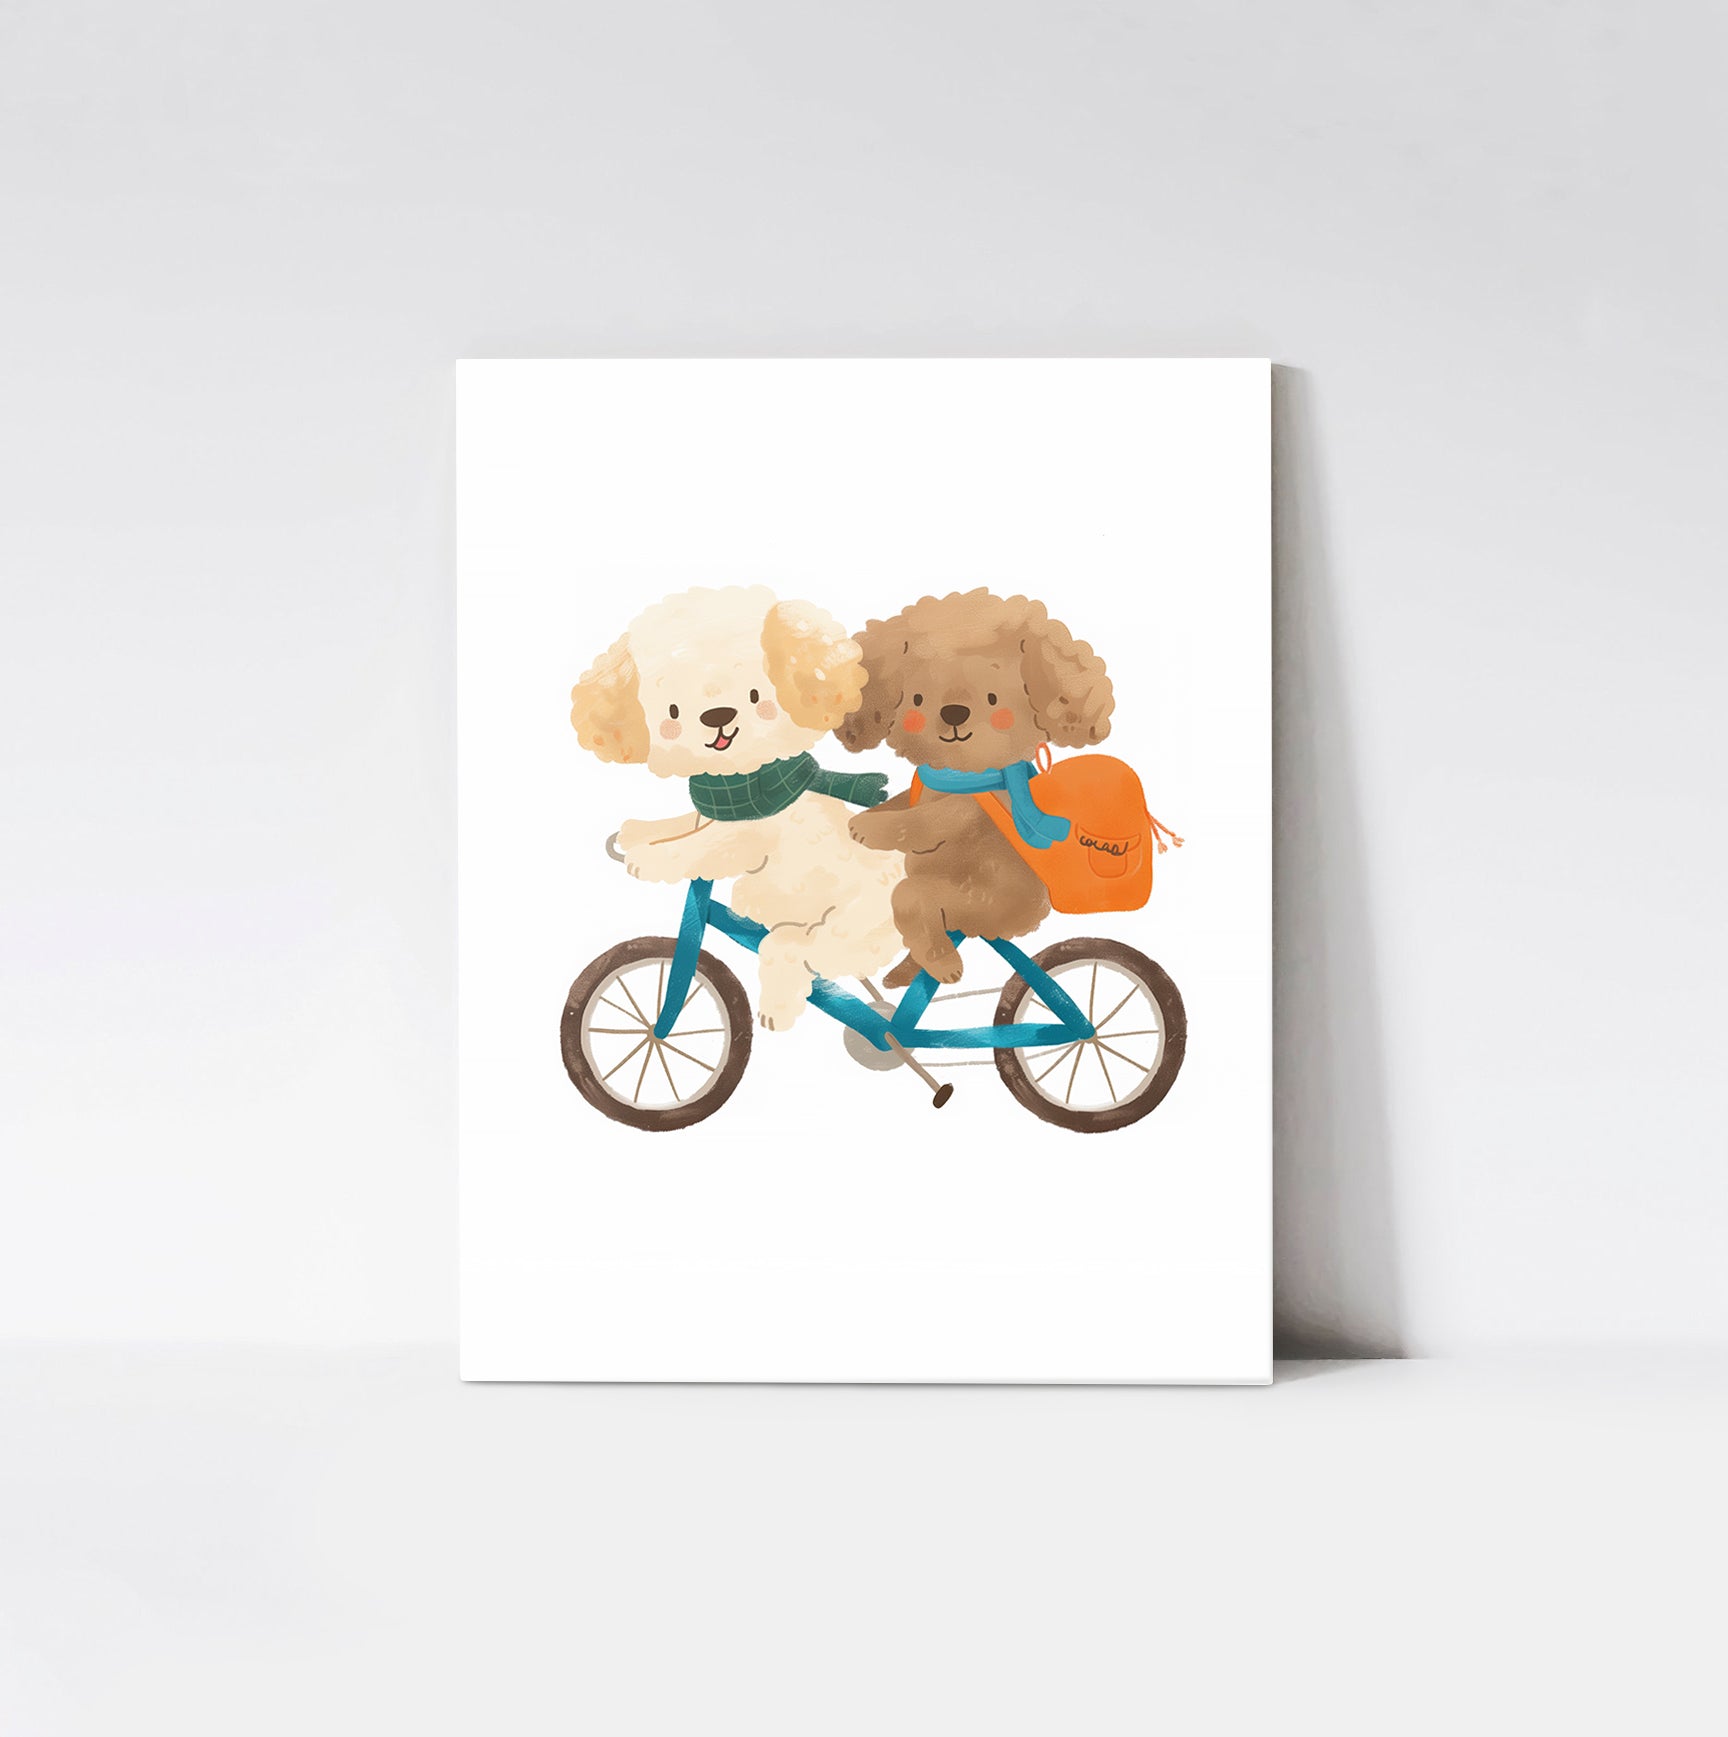 Puppy Pals Bicycle Ride Art Print from Timberlea Interiors Kids Art Print Collection mounted on a wood board, featuring two cute puppies riding a tandem bicycle with vibrant details.